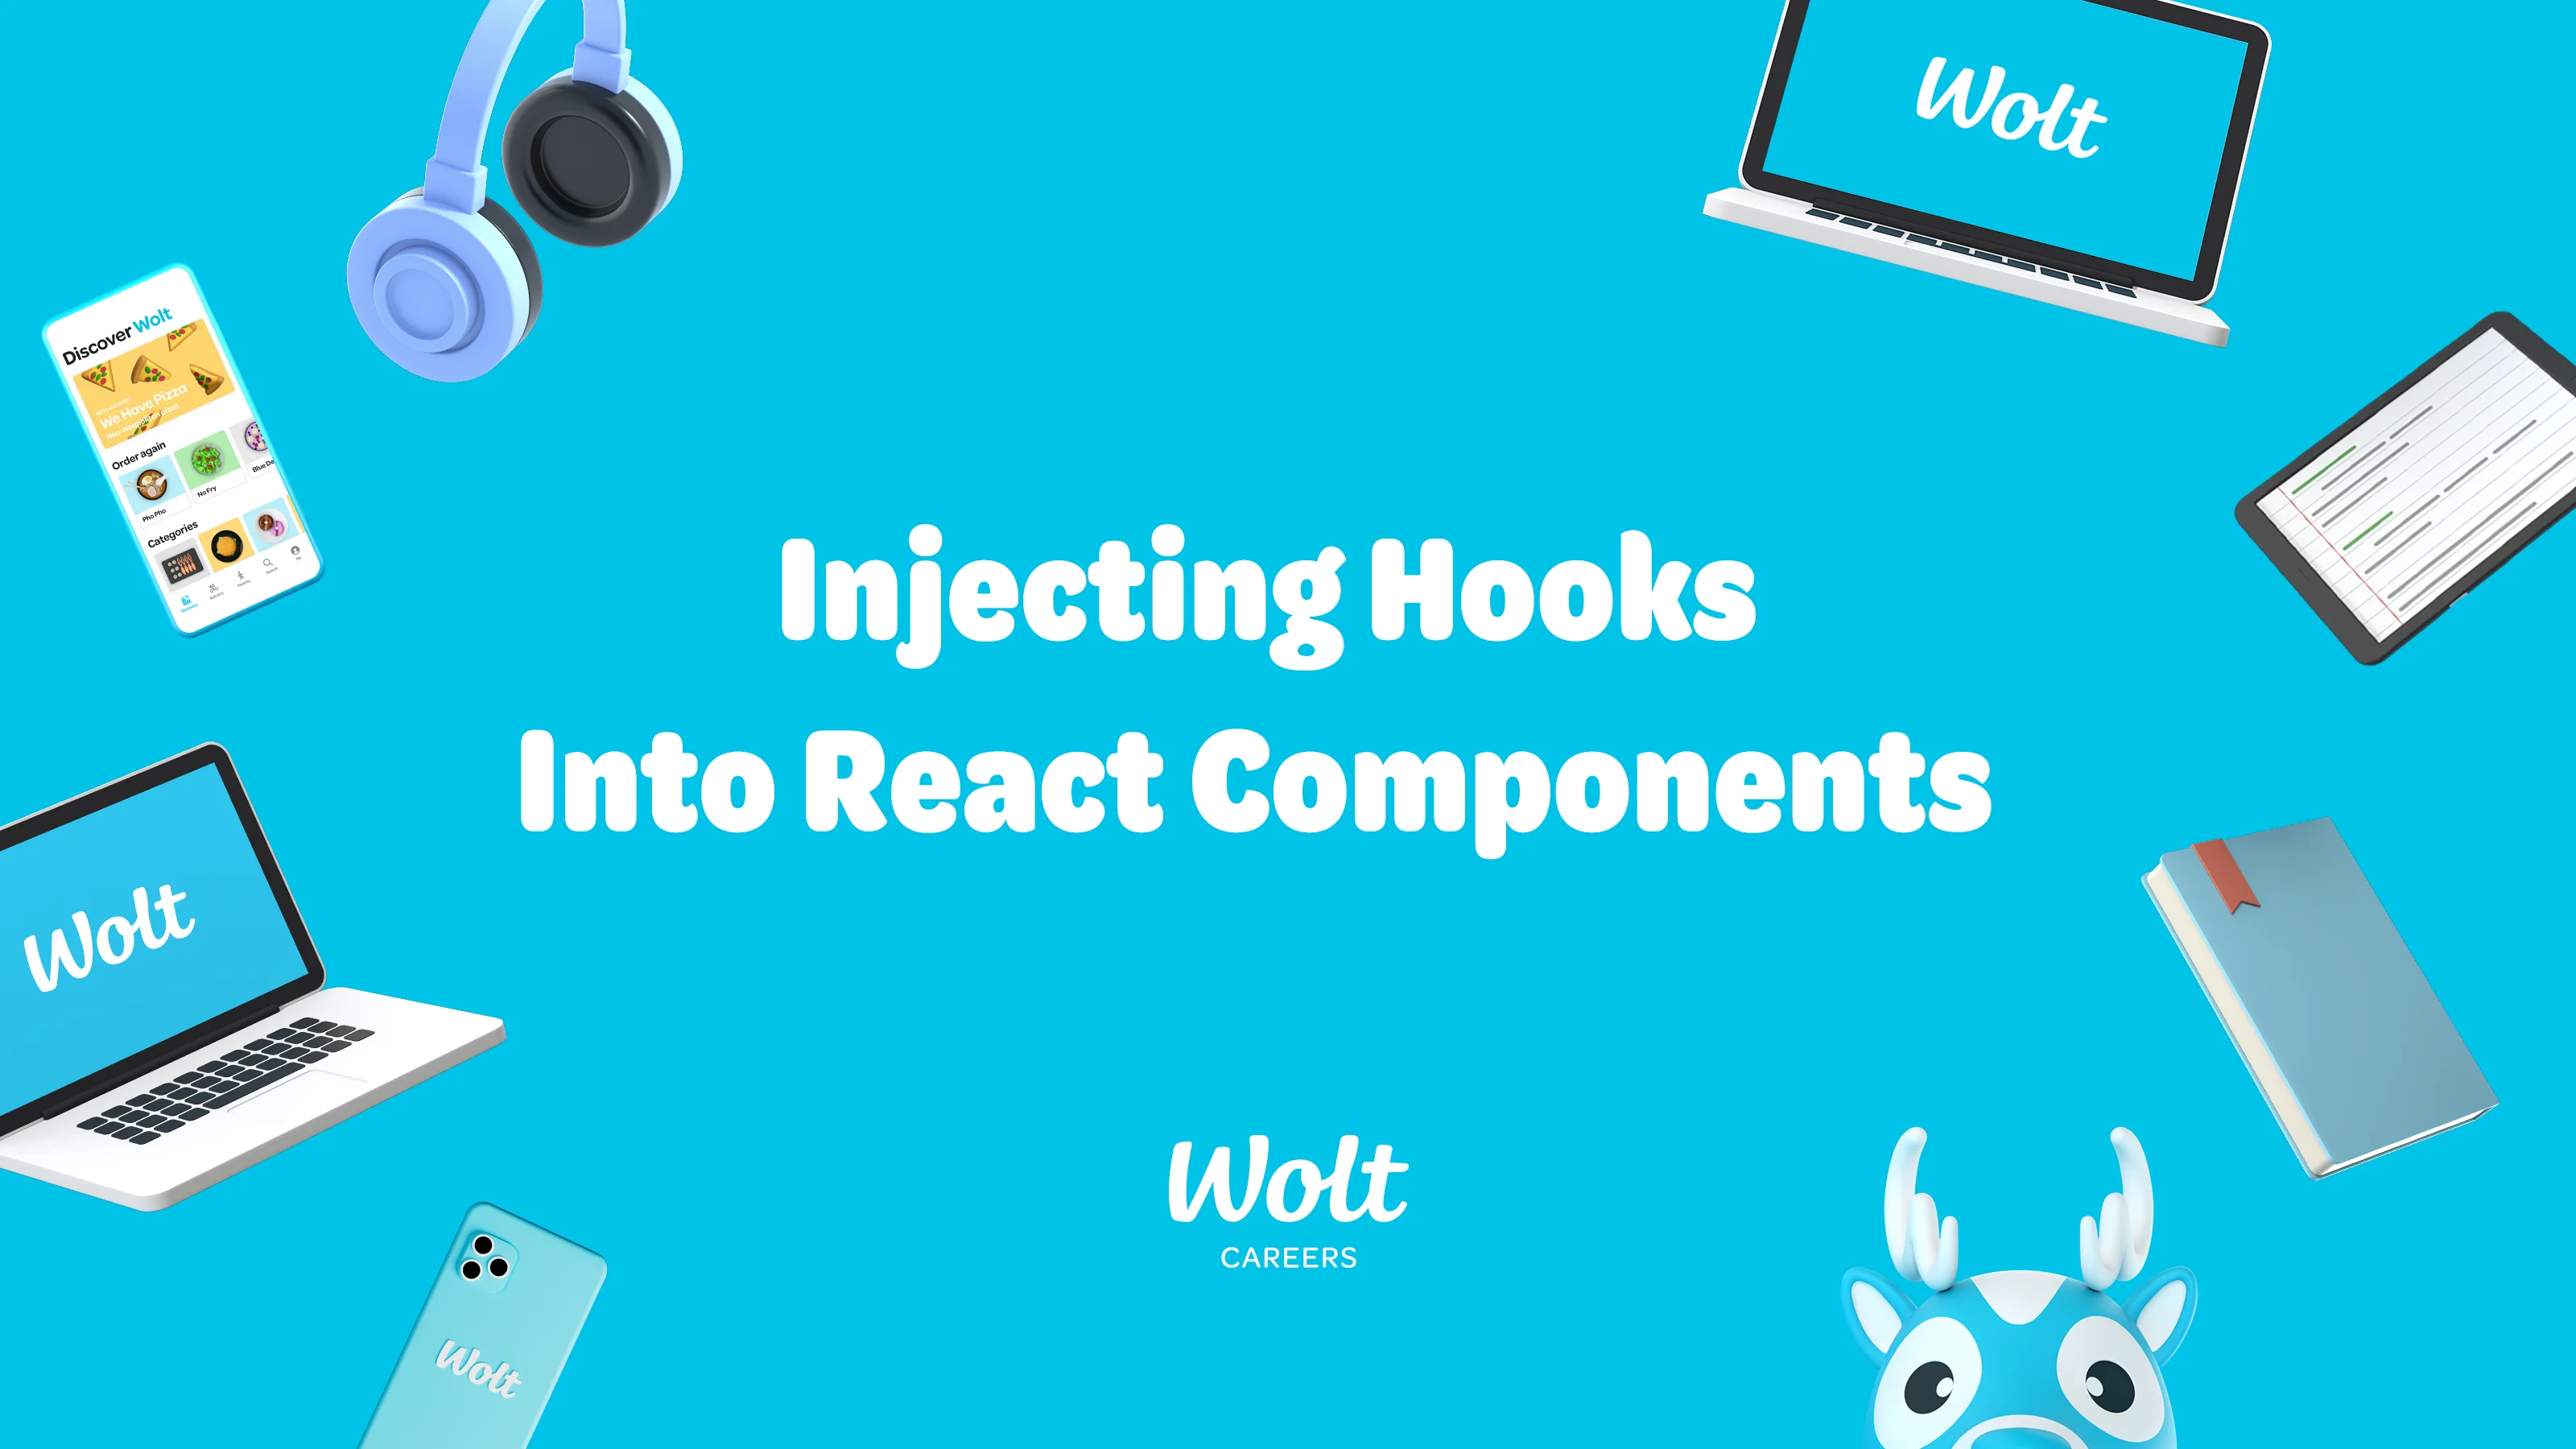 Injecting-hooks-blog-cover (1)